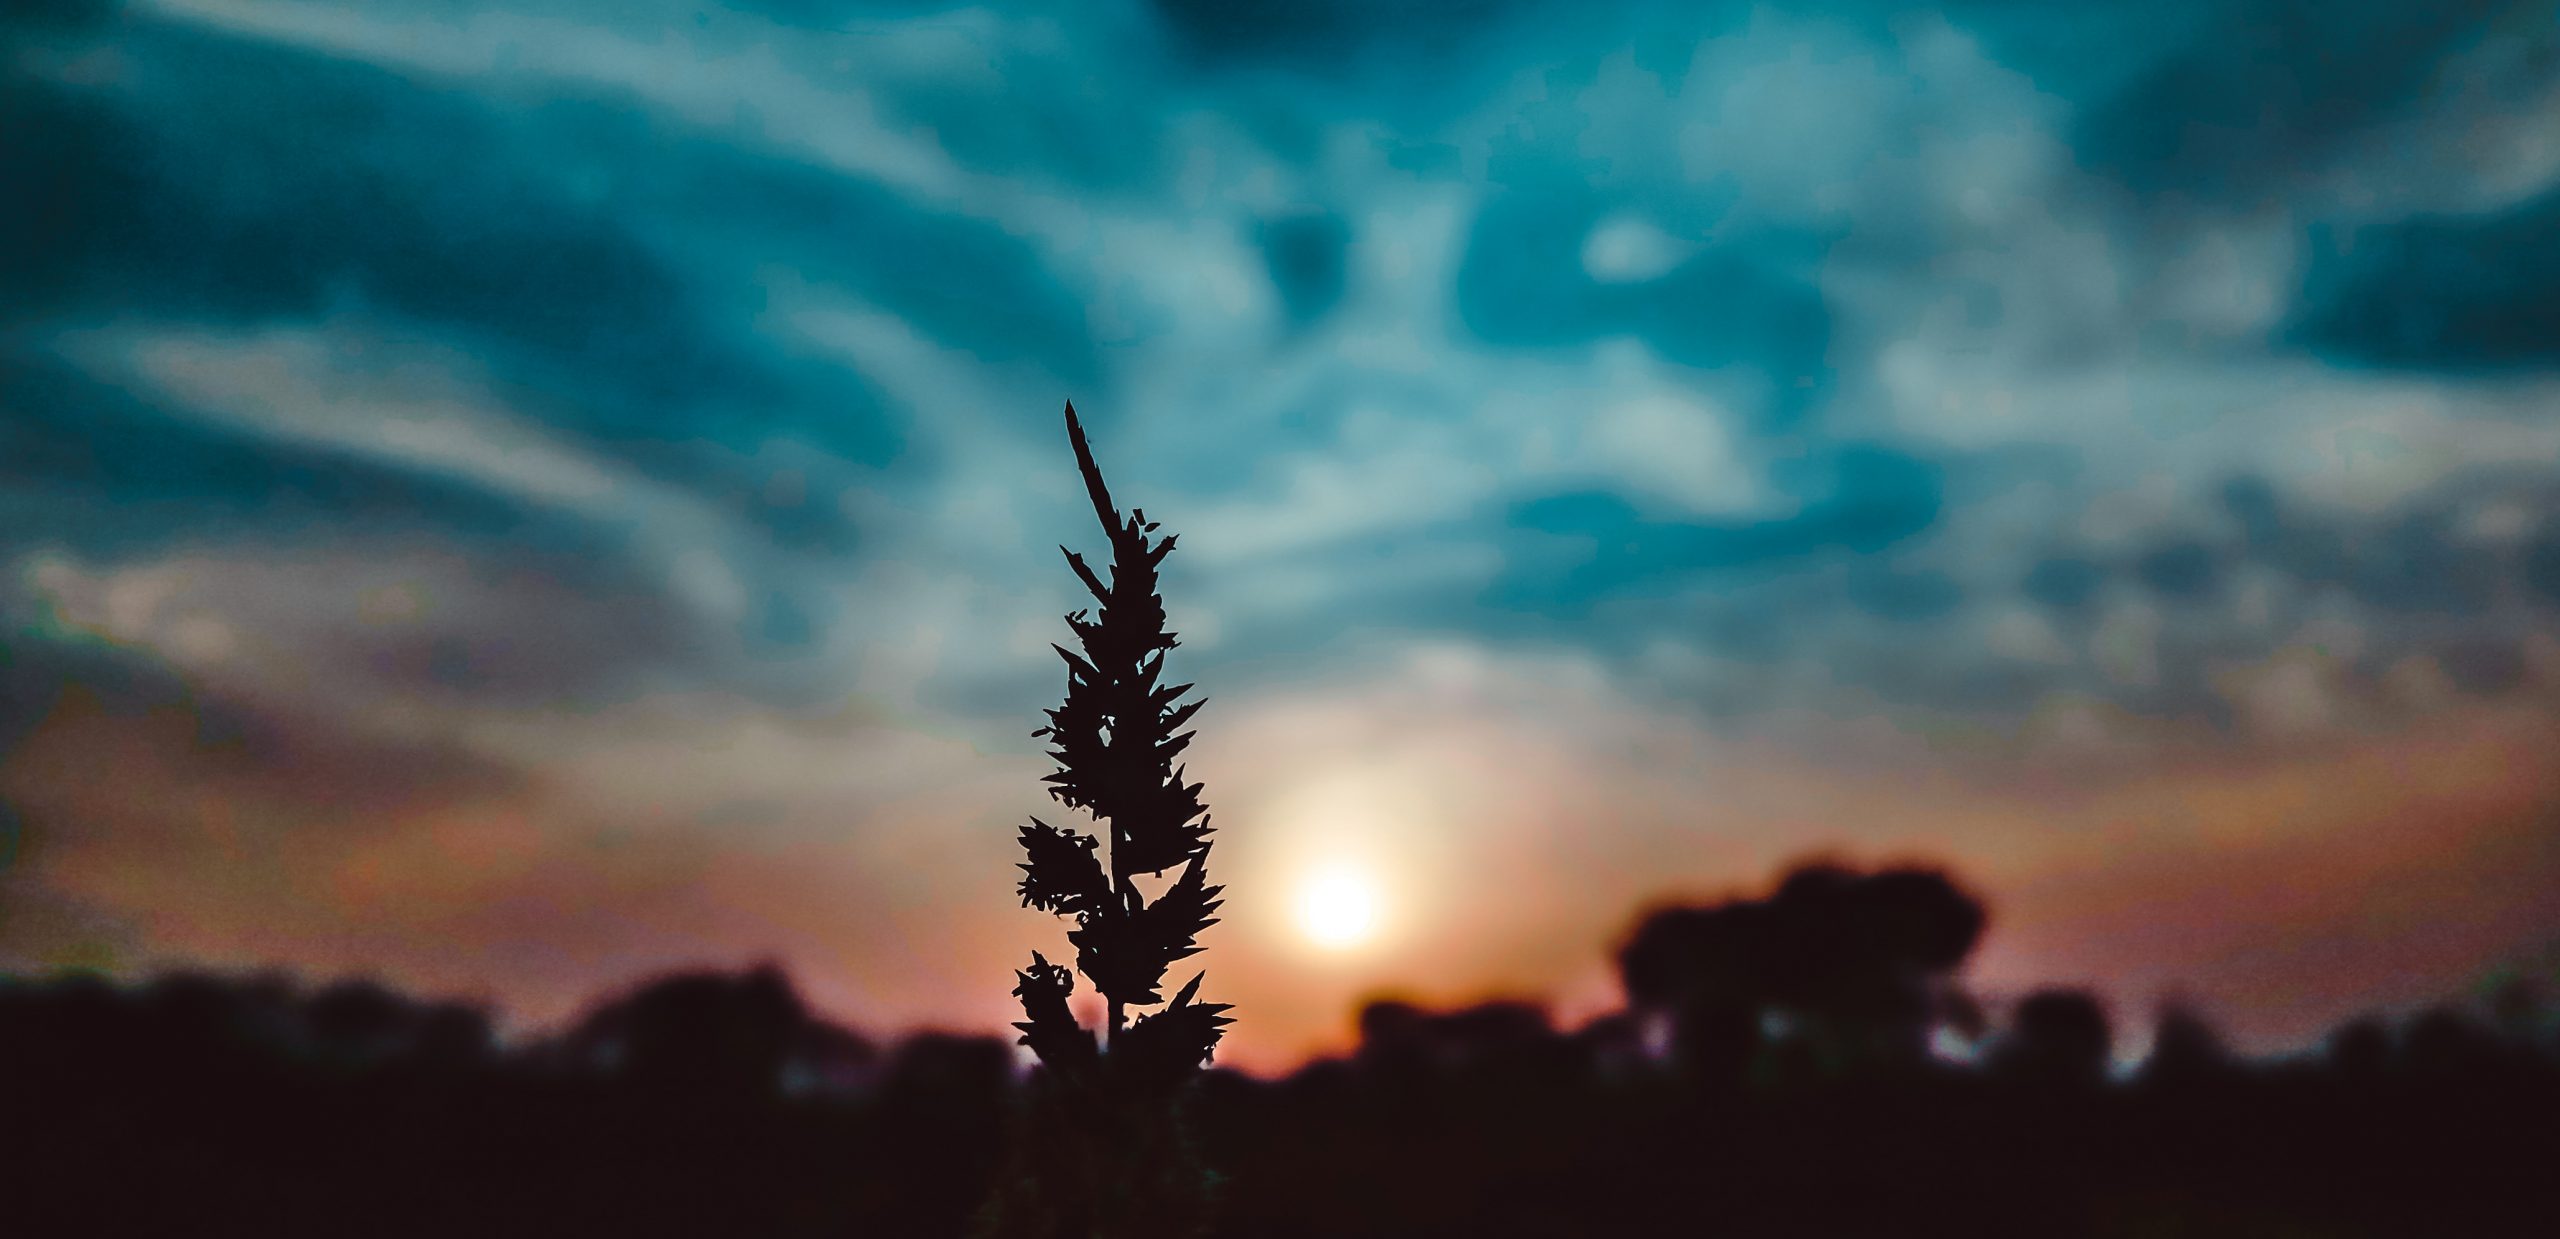 A plant and evening